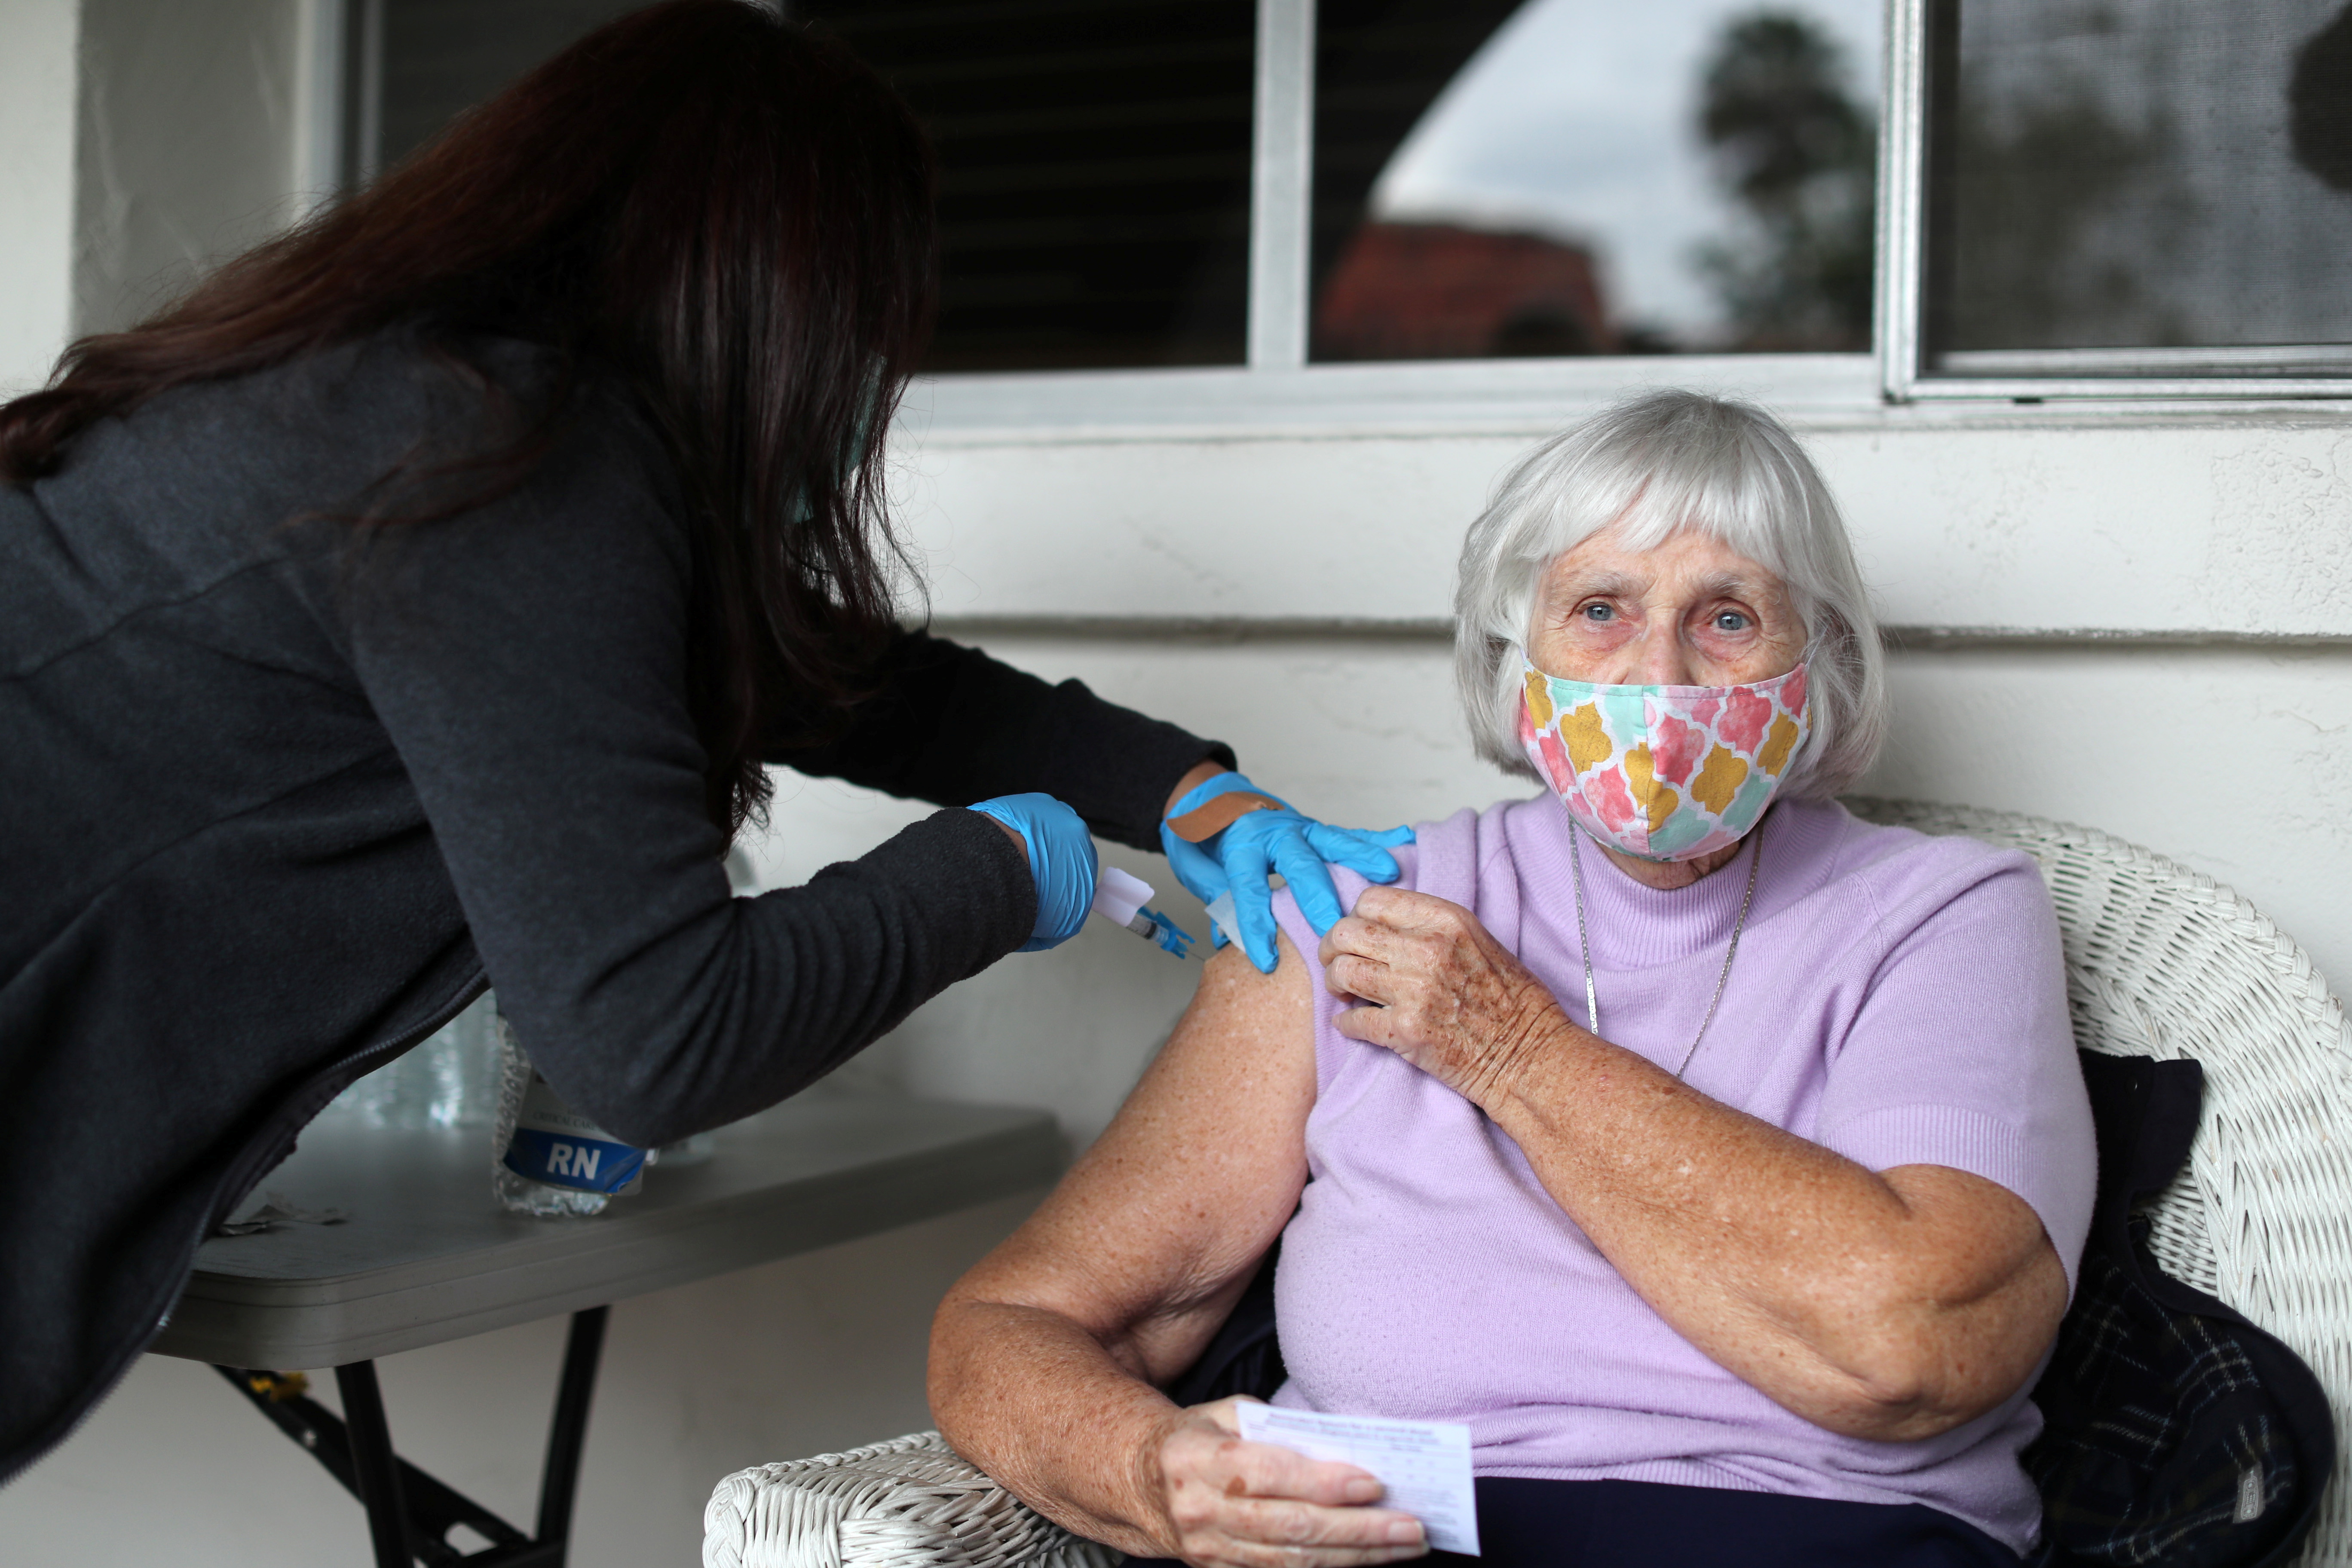 Sister Barbara Sullivan, 84, receives a coronavirus disease (COVID-19) vaccine at a vaccination drive for retired nuns at the Sisters of St. Joseph of Carondelet independent living center in Los Angeles, California, U.S., March 3, 2021. REUTERS/Lucy Nicholson